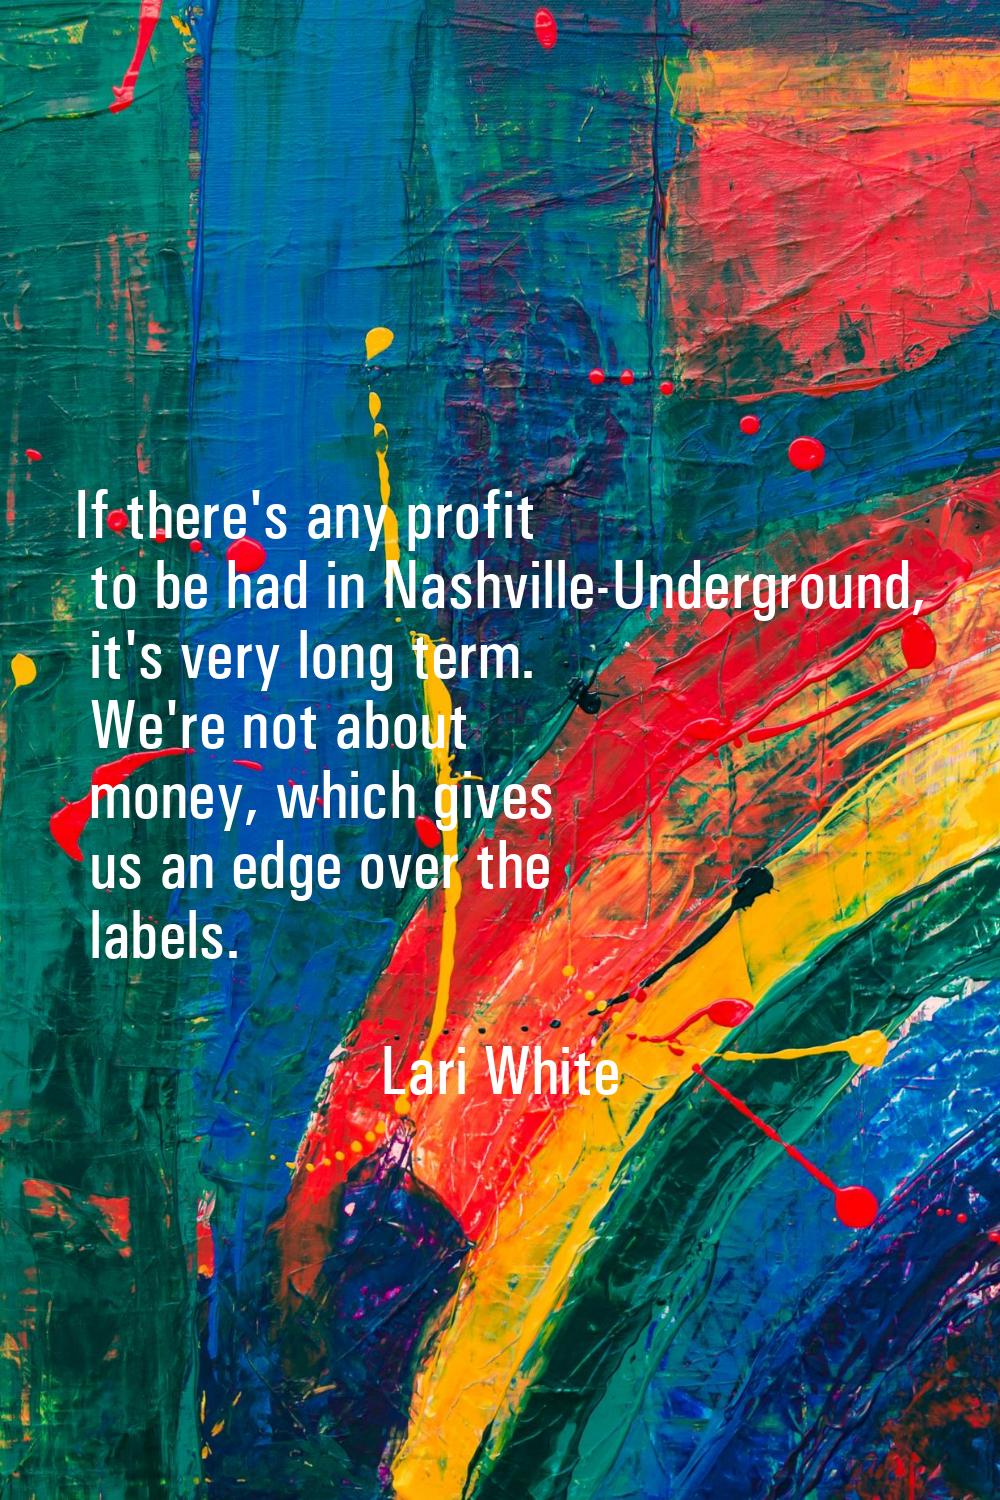 If there's any profit to be had in Nashville-Underground, it's very long term. We're not about mone